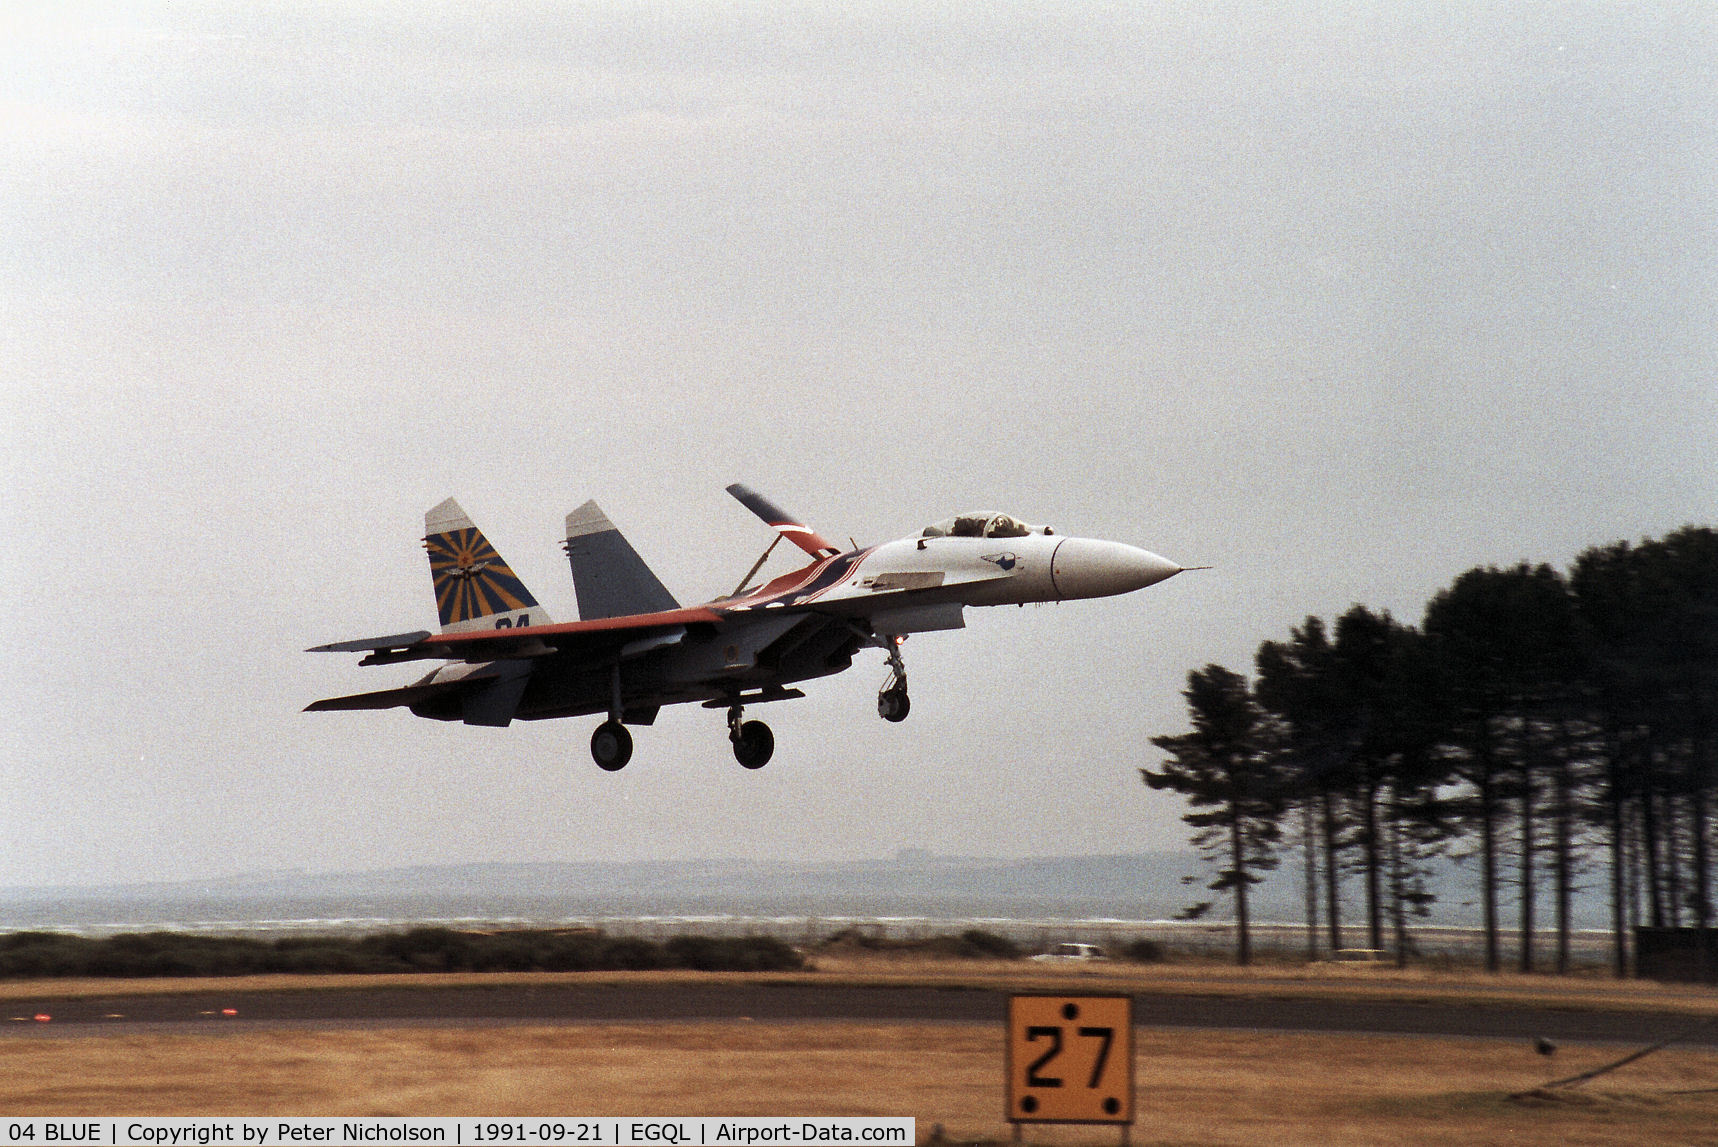 04 BLUE, Sukhoi Su-27A C/N 36911032001, Flanker B of the Russian Knights display team on final approach at the 1991 RAF Leuchars Airshow.